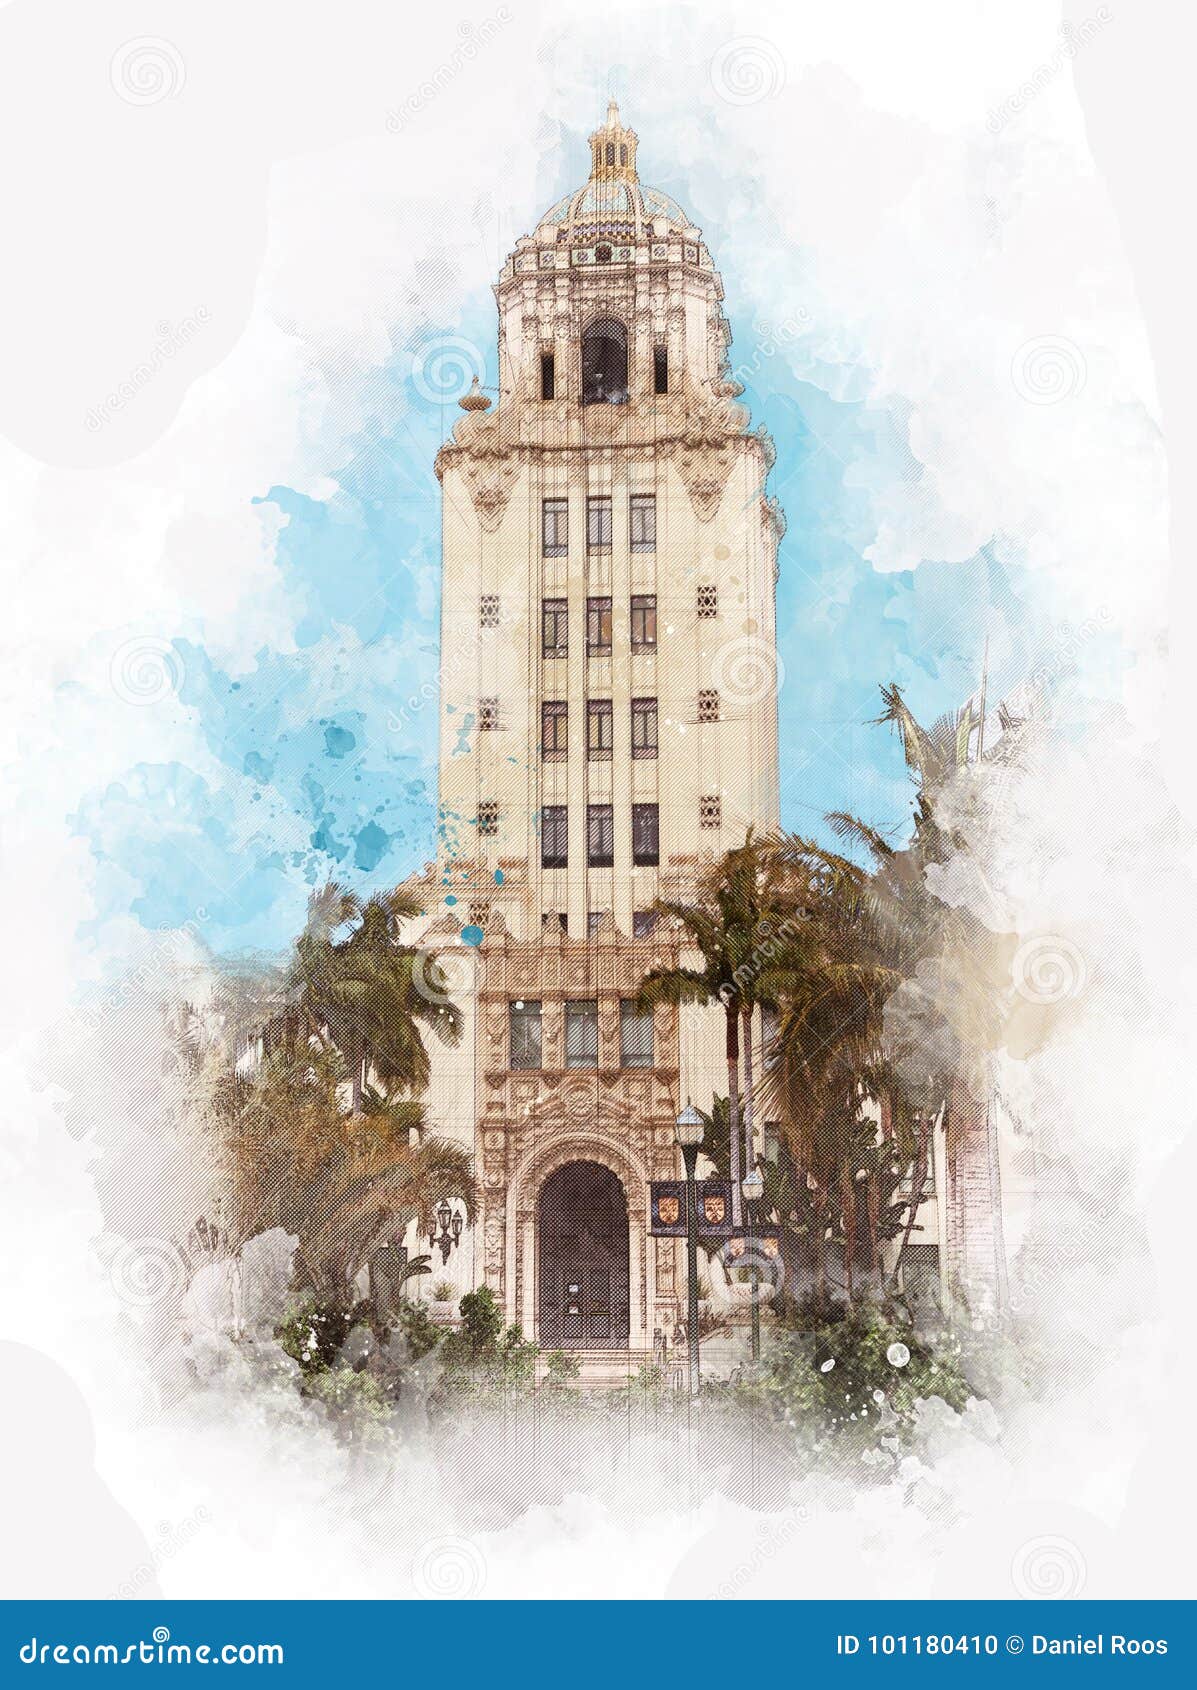 Image of Art Deco retro style architecture of the Beverly Hills Civic